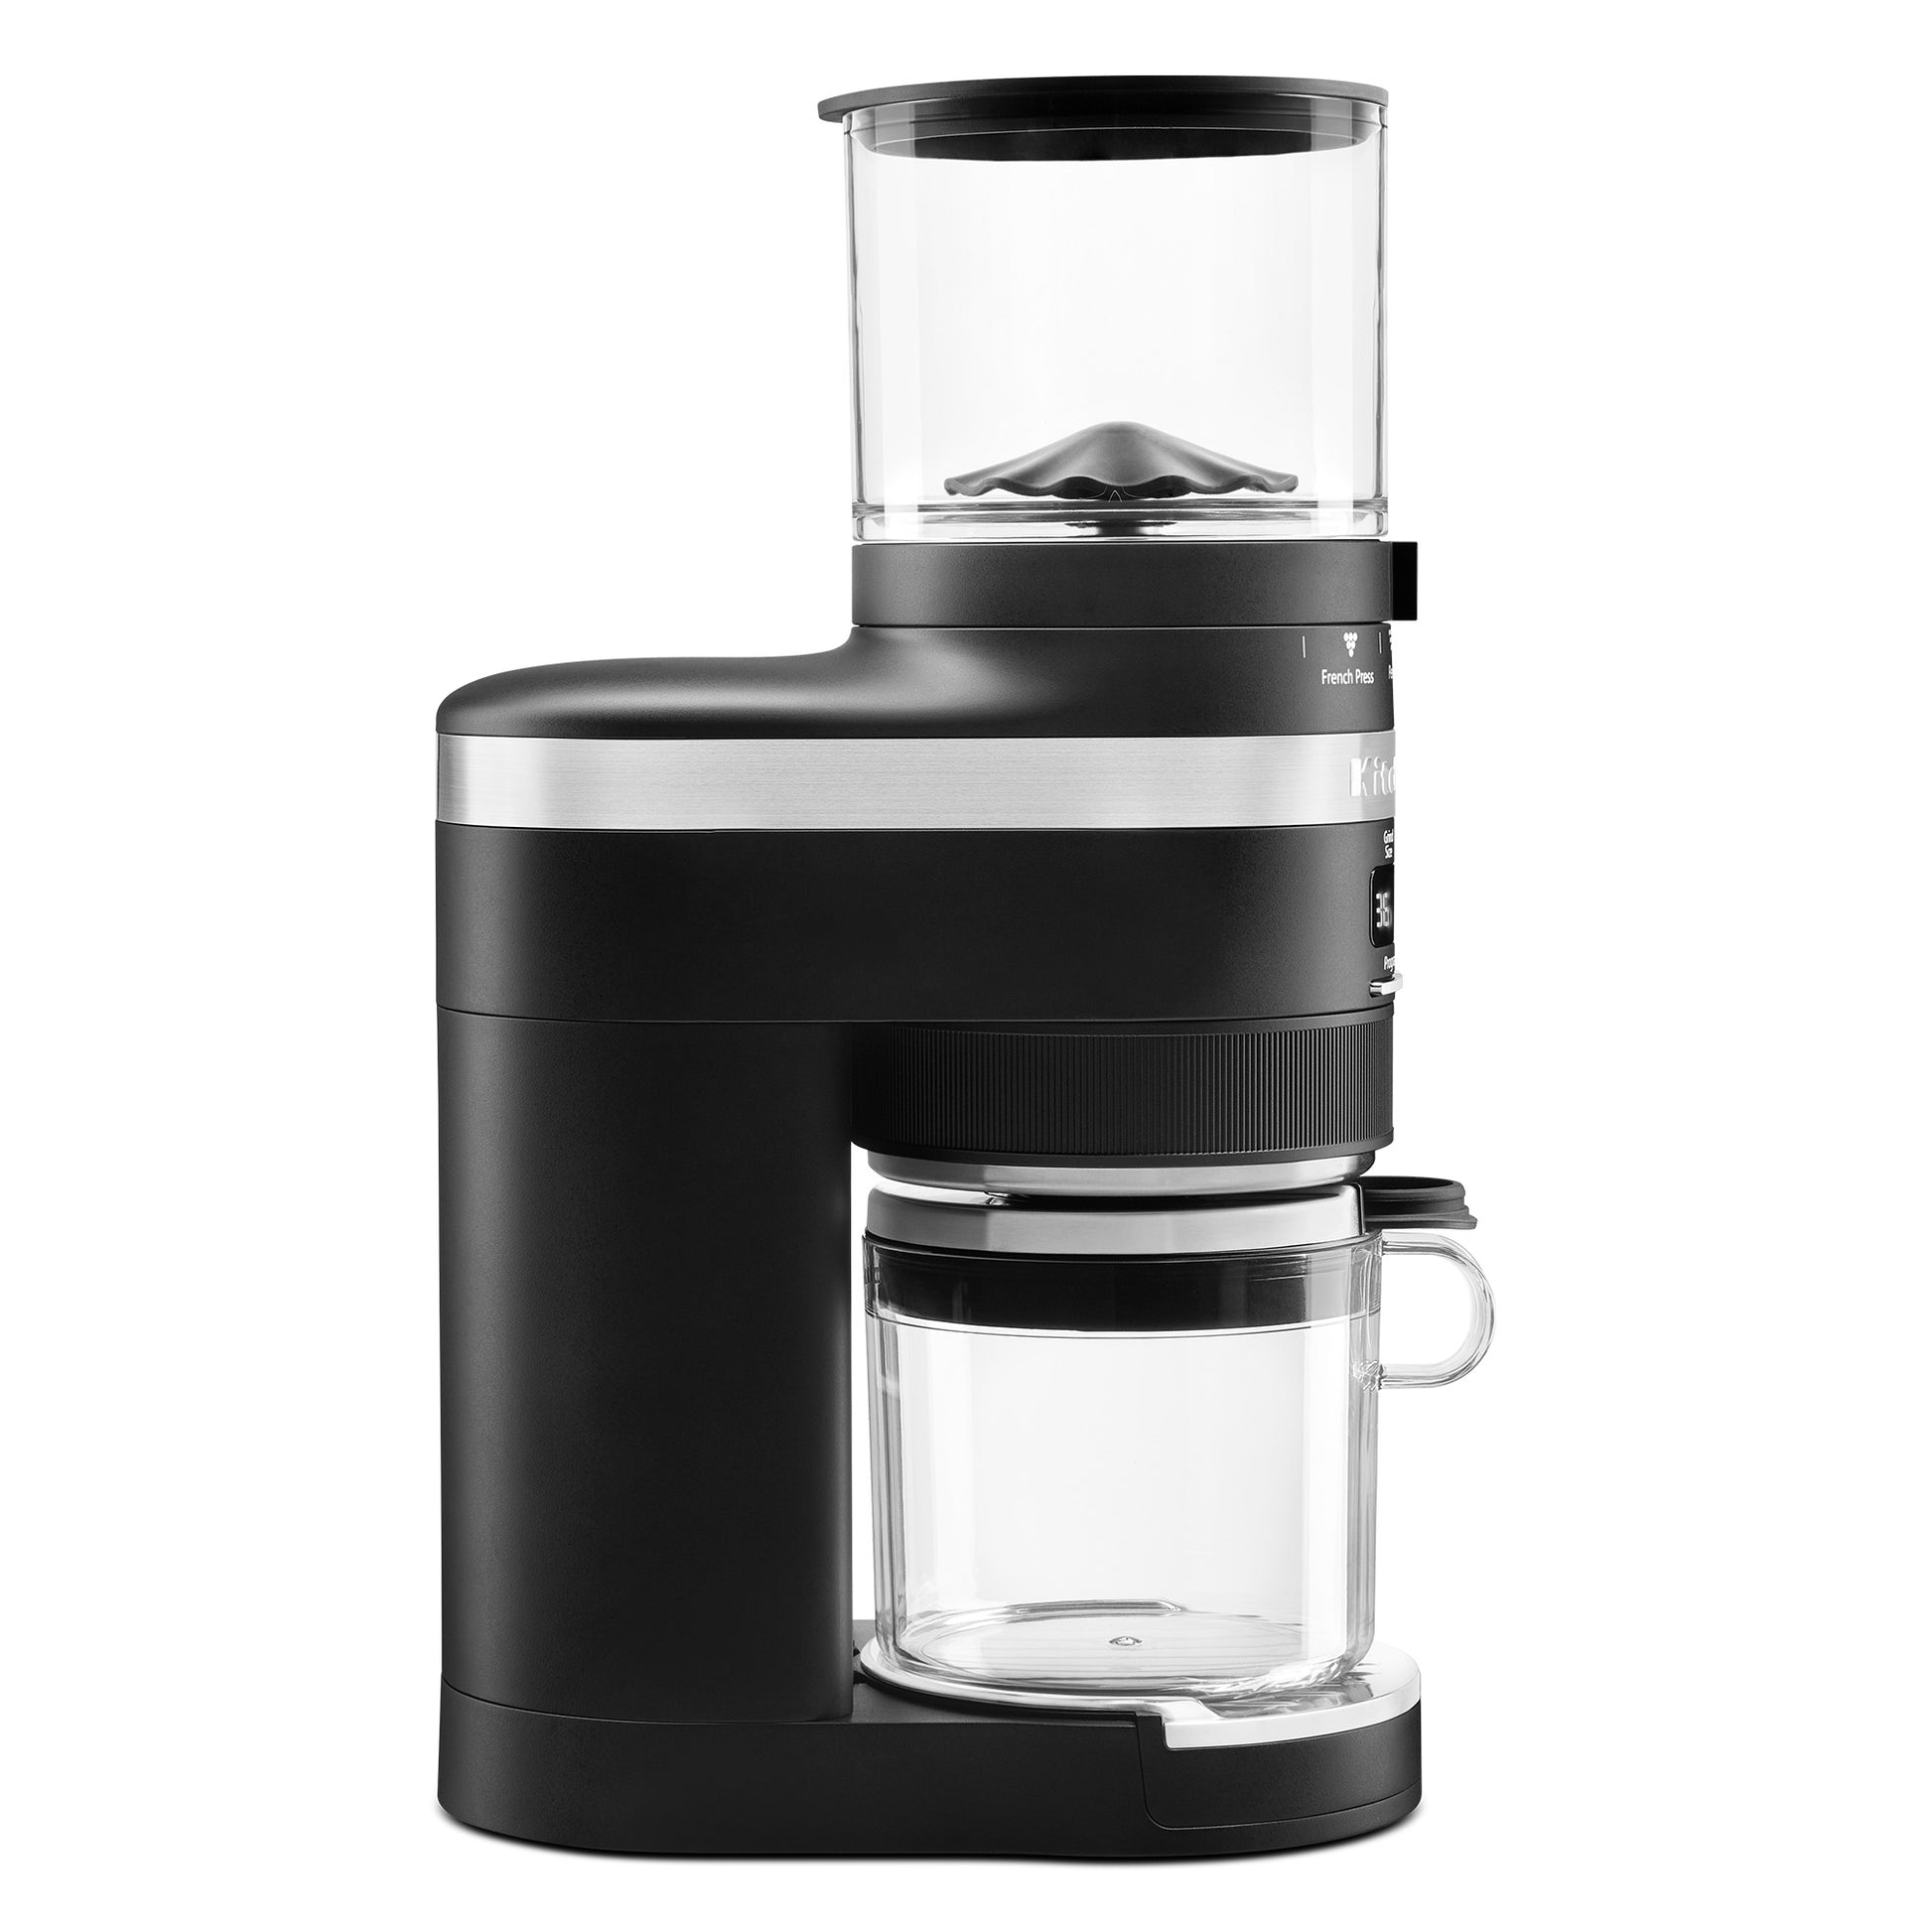 KCG8433DG in Matte Charcoal Grey by KitchenAid in Lecompte, LA - Burr  Coffee Grinder